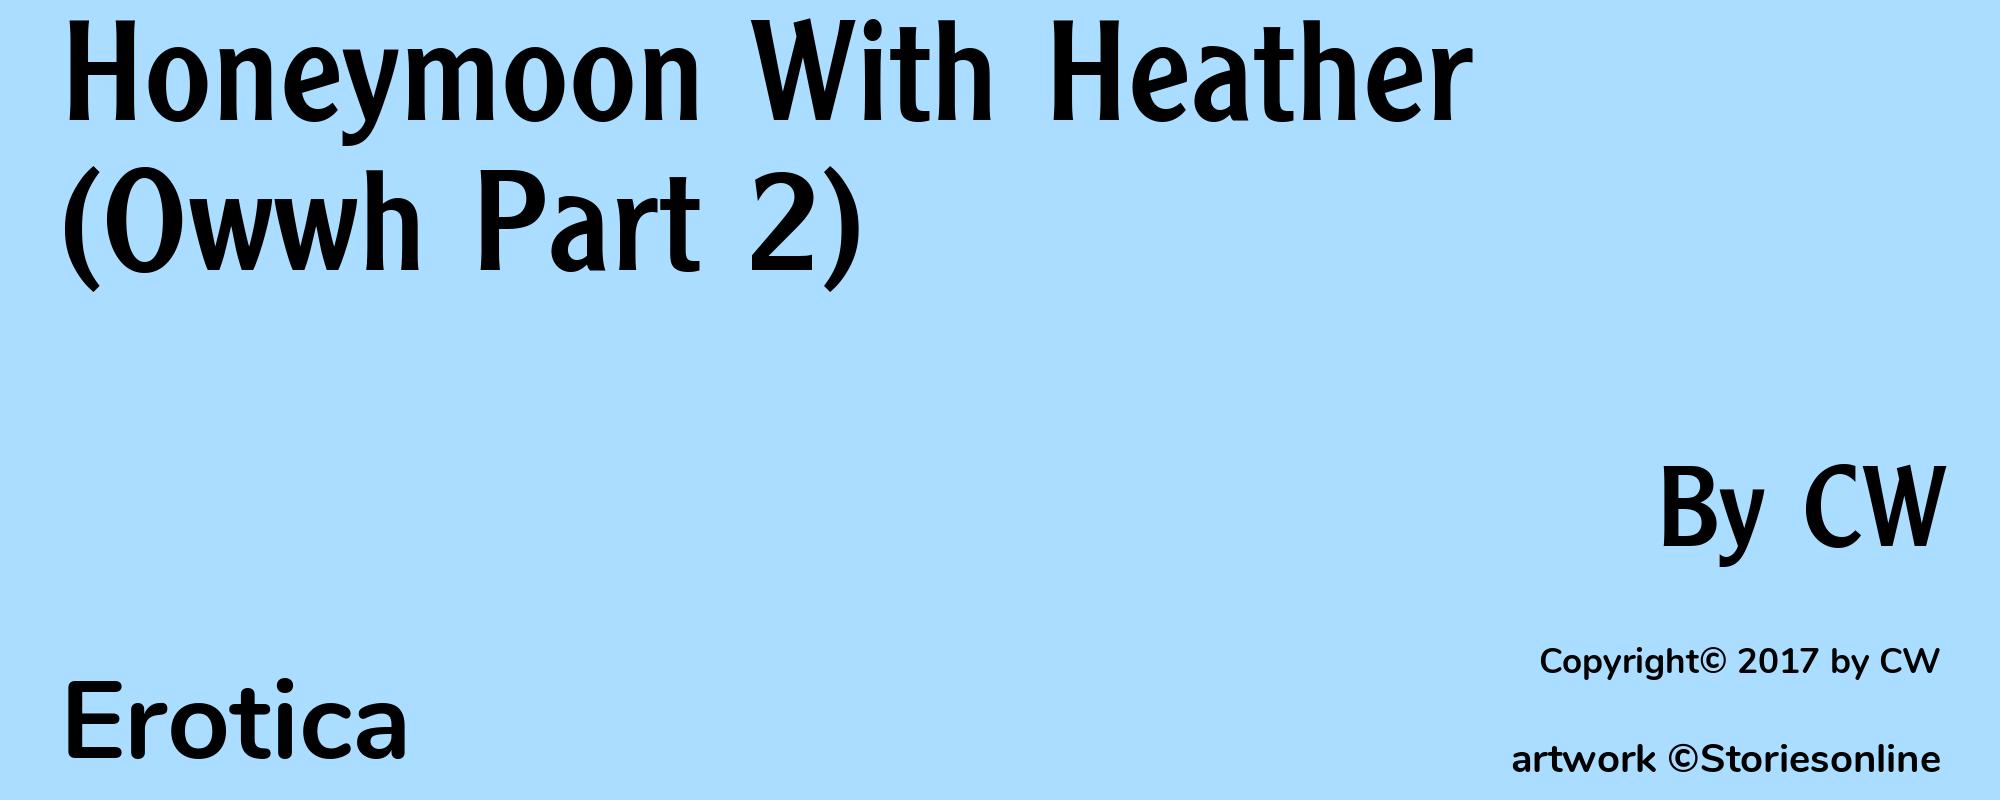 Honeymoon With Heather (Owwh Part 2) - Cover